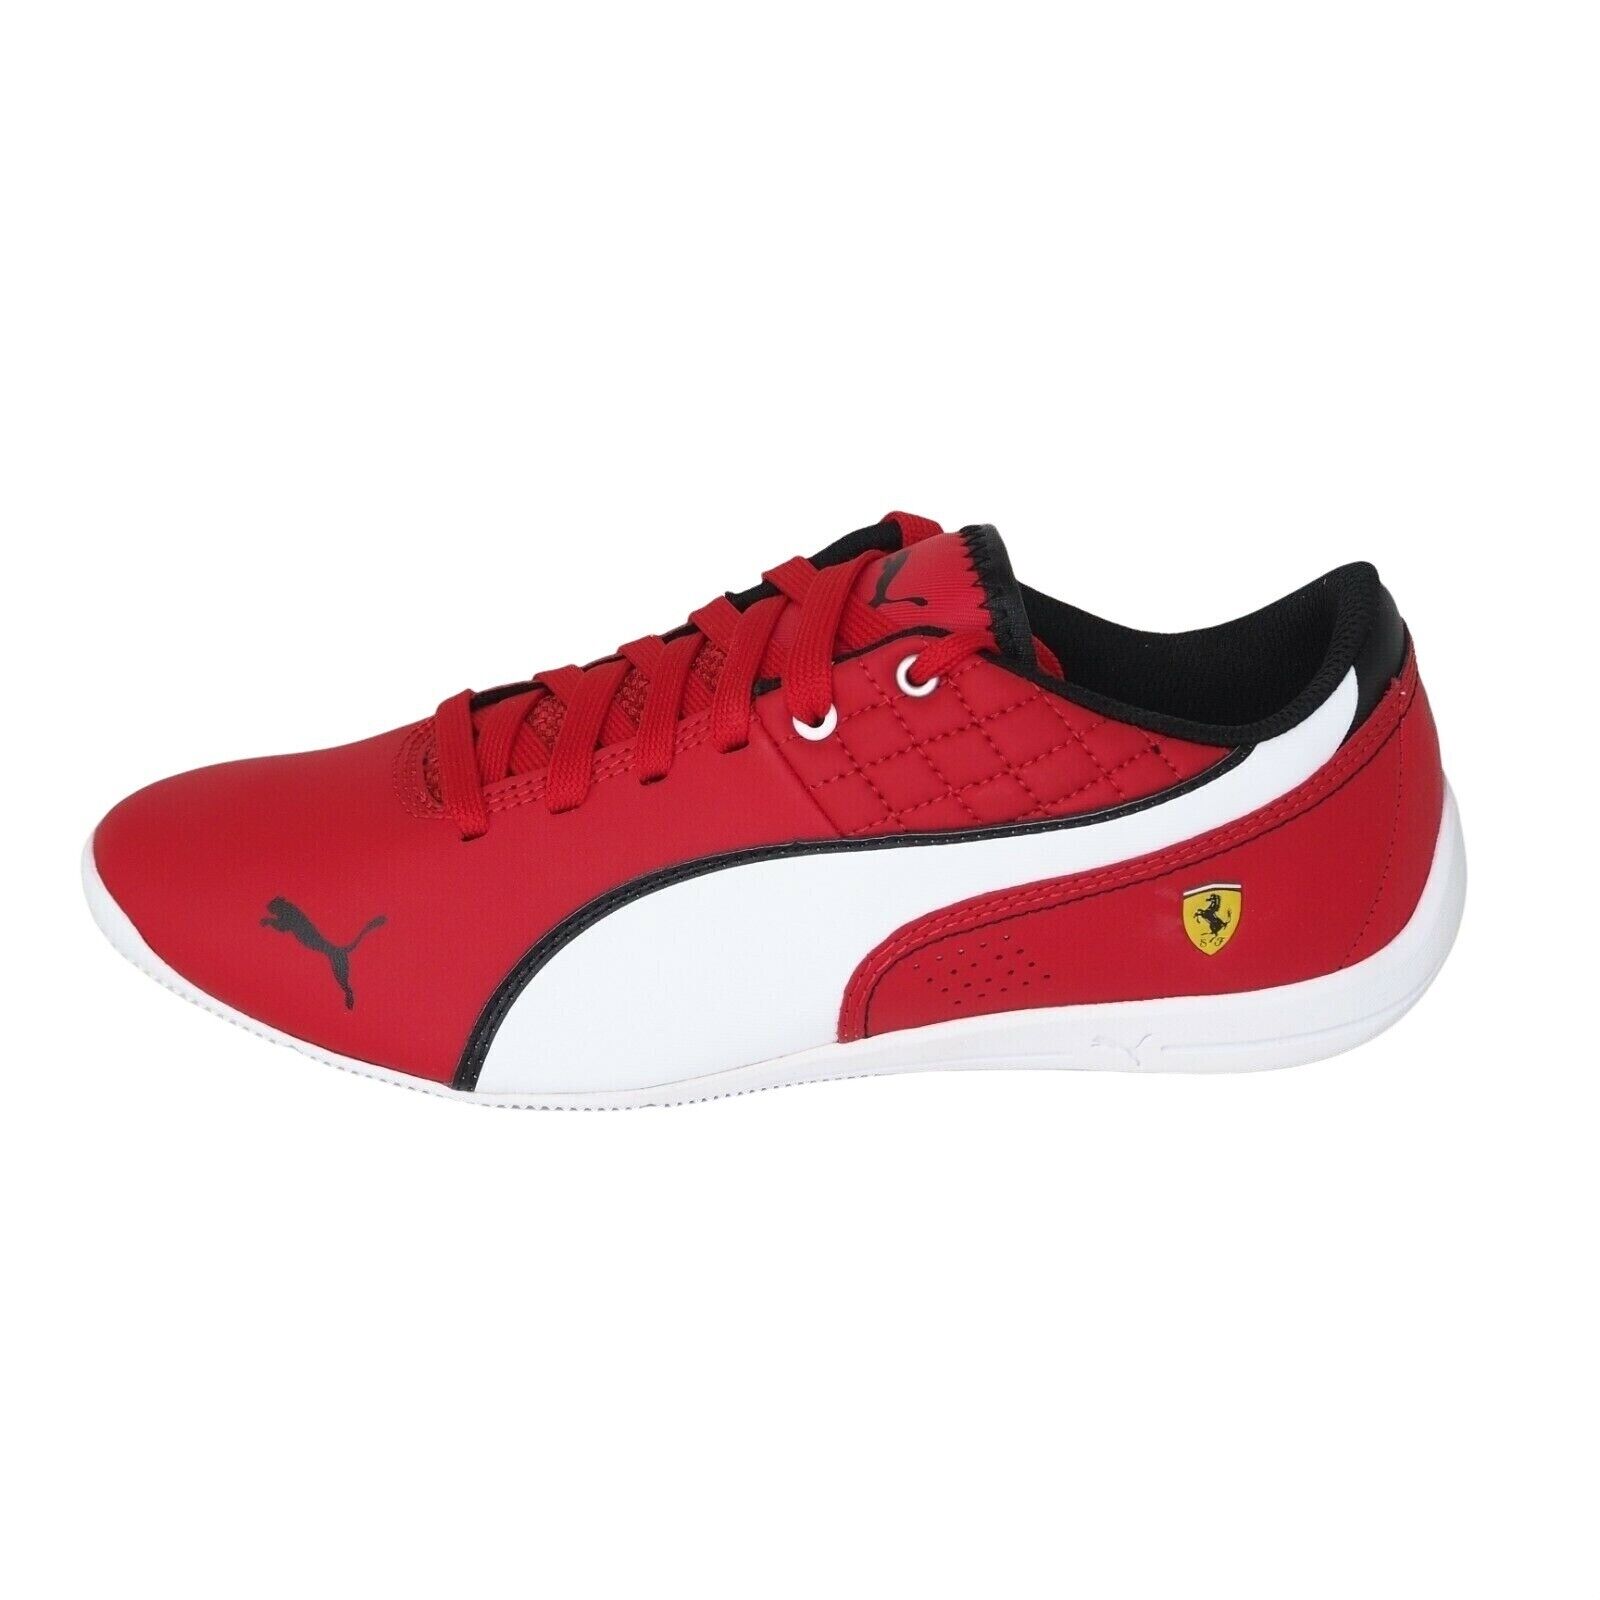 Puma Drift Cat 6 L NM Boys Shoes Leather Sneakers 358775 03 Red SZ 6.5 Casual | eBay